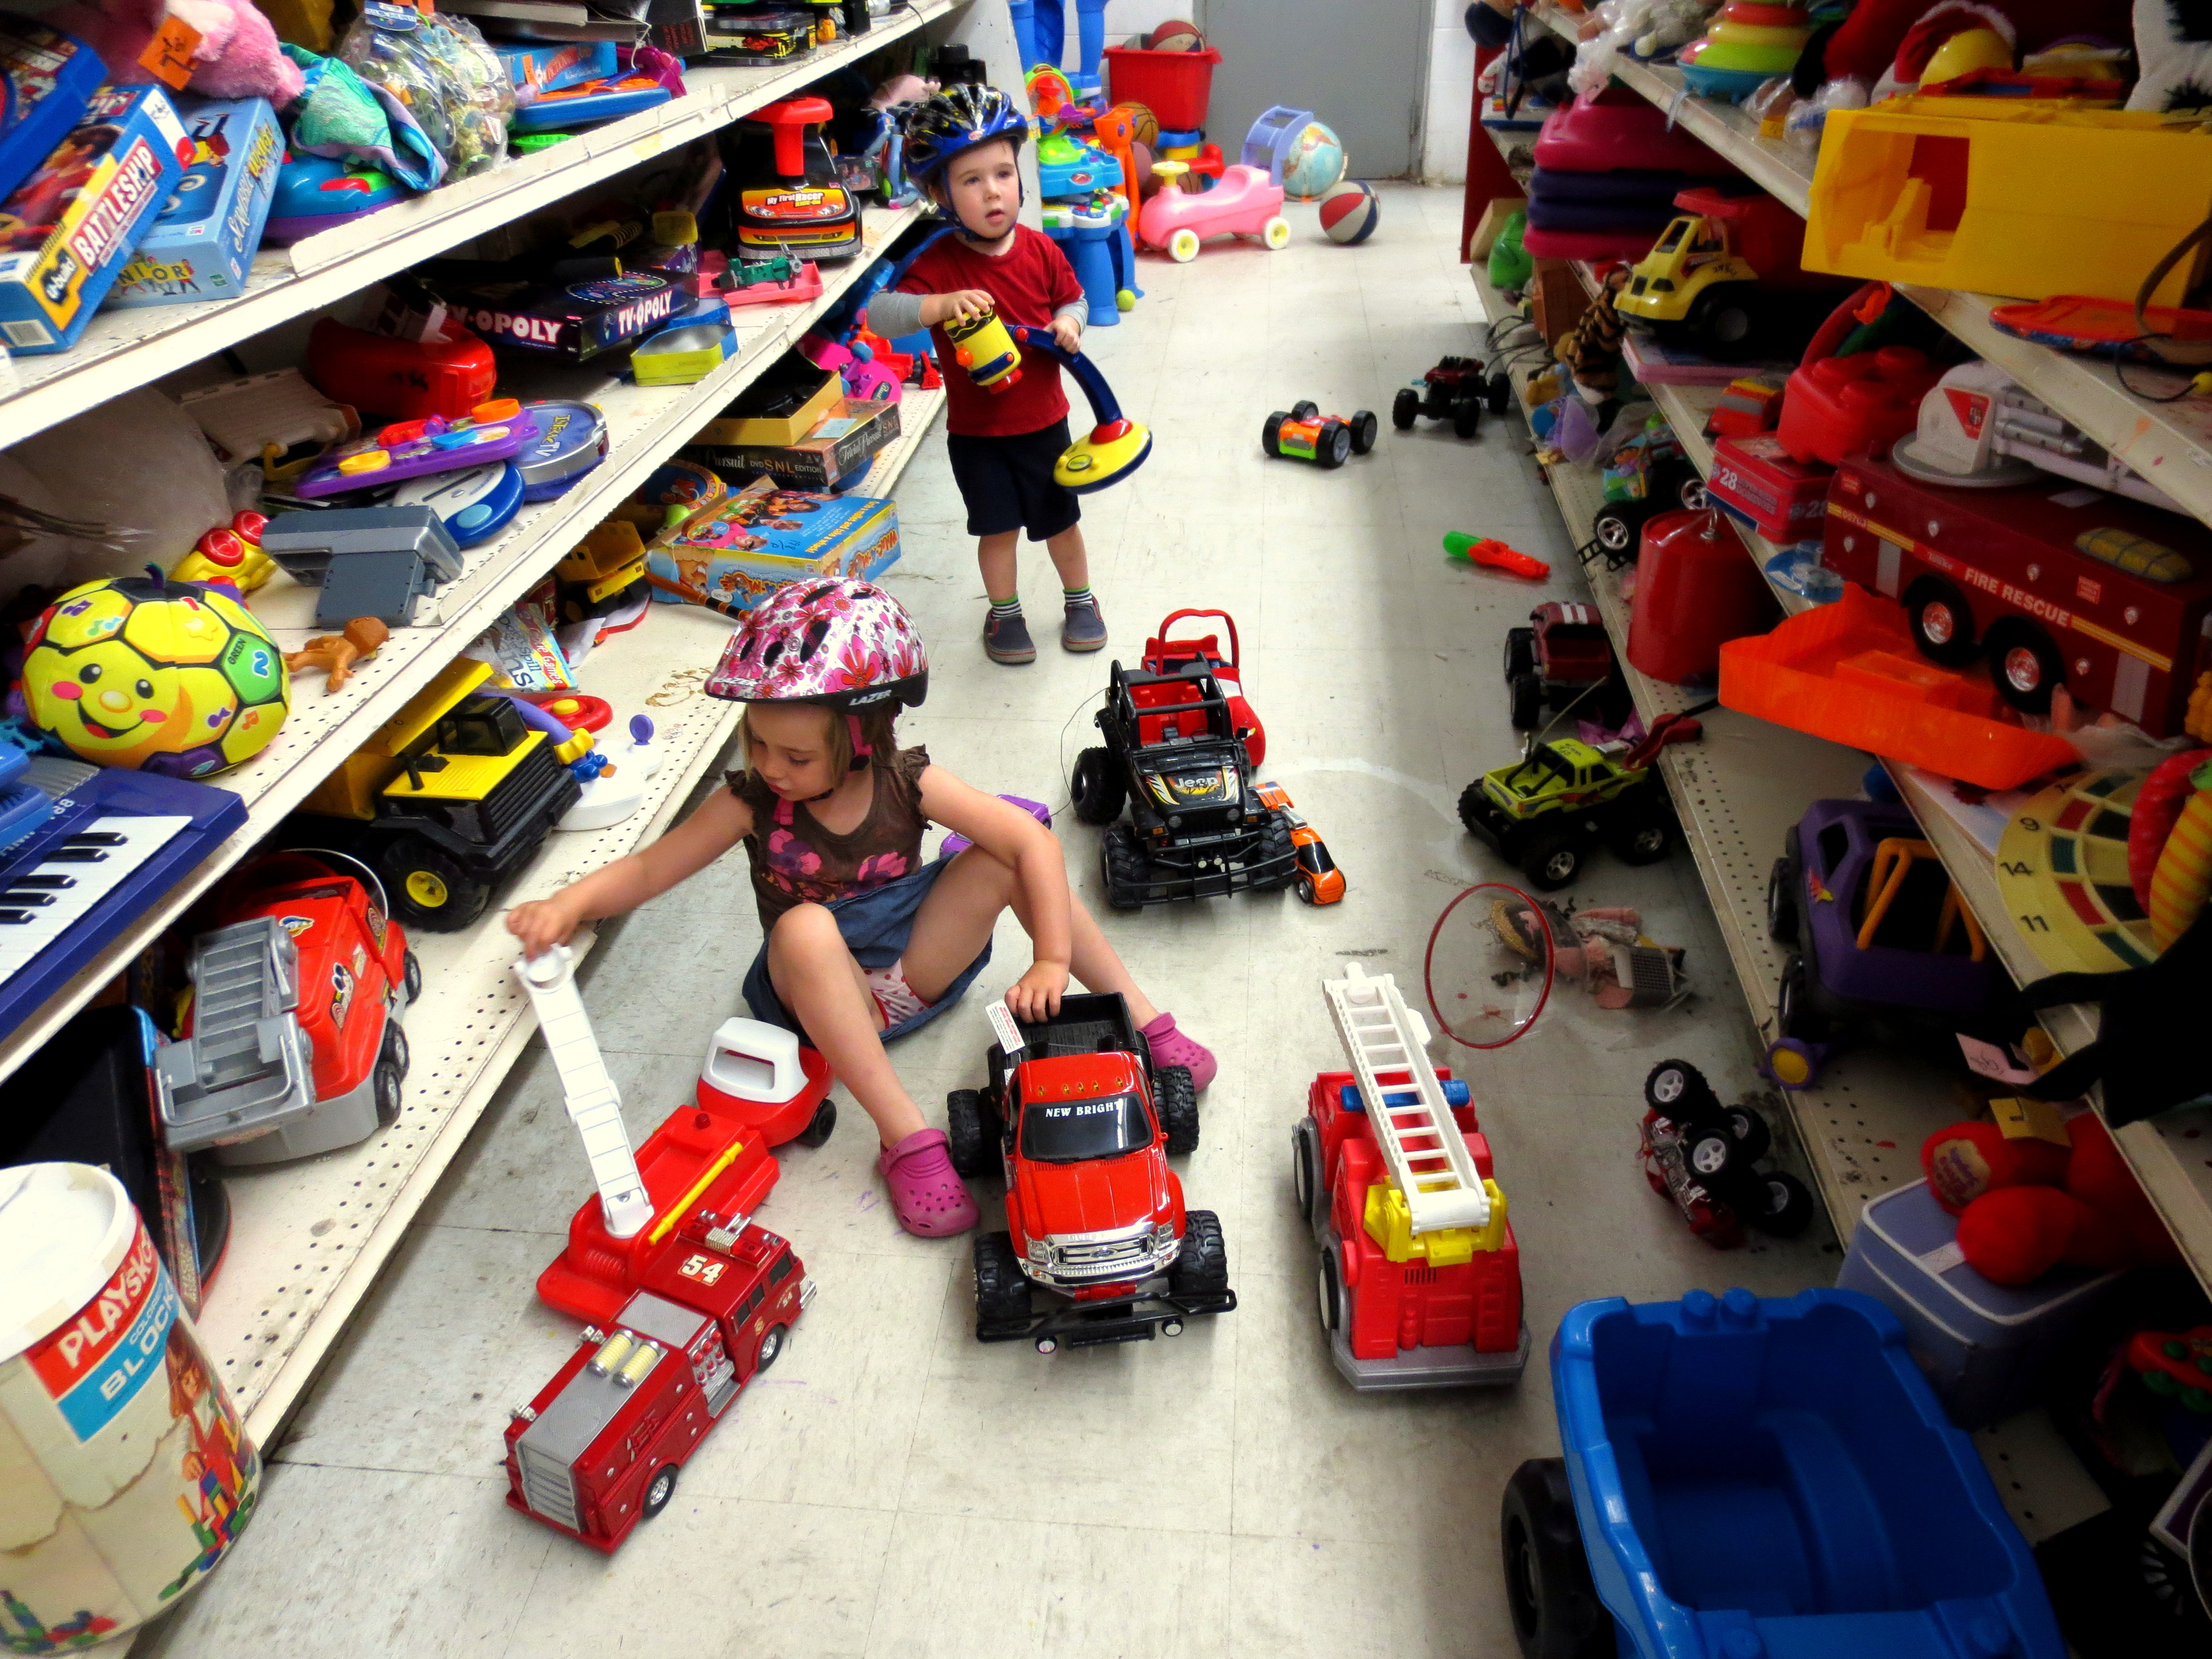 toy resale store